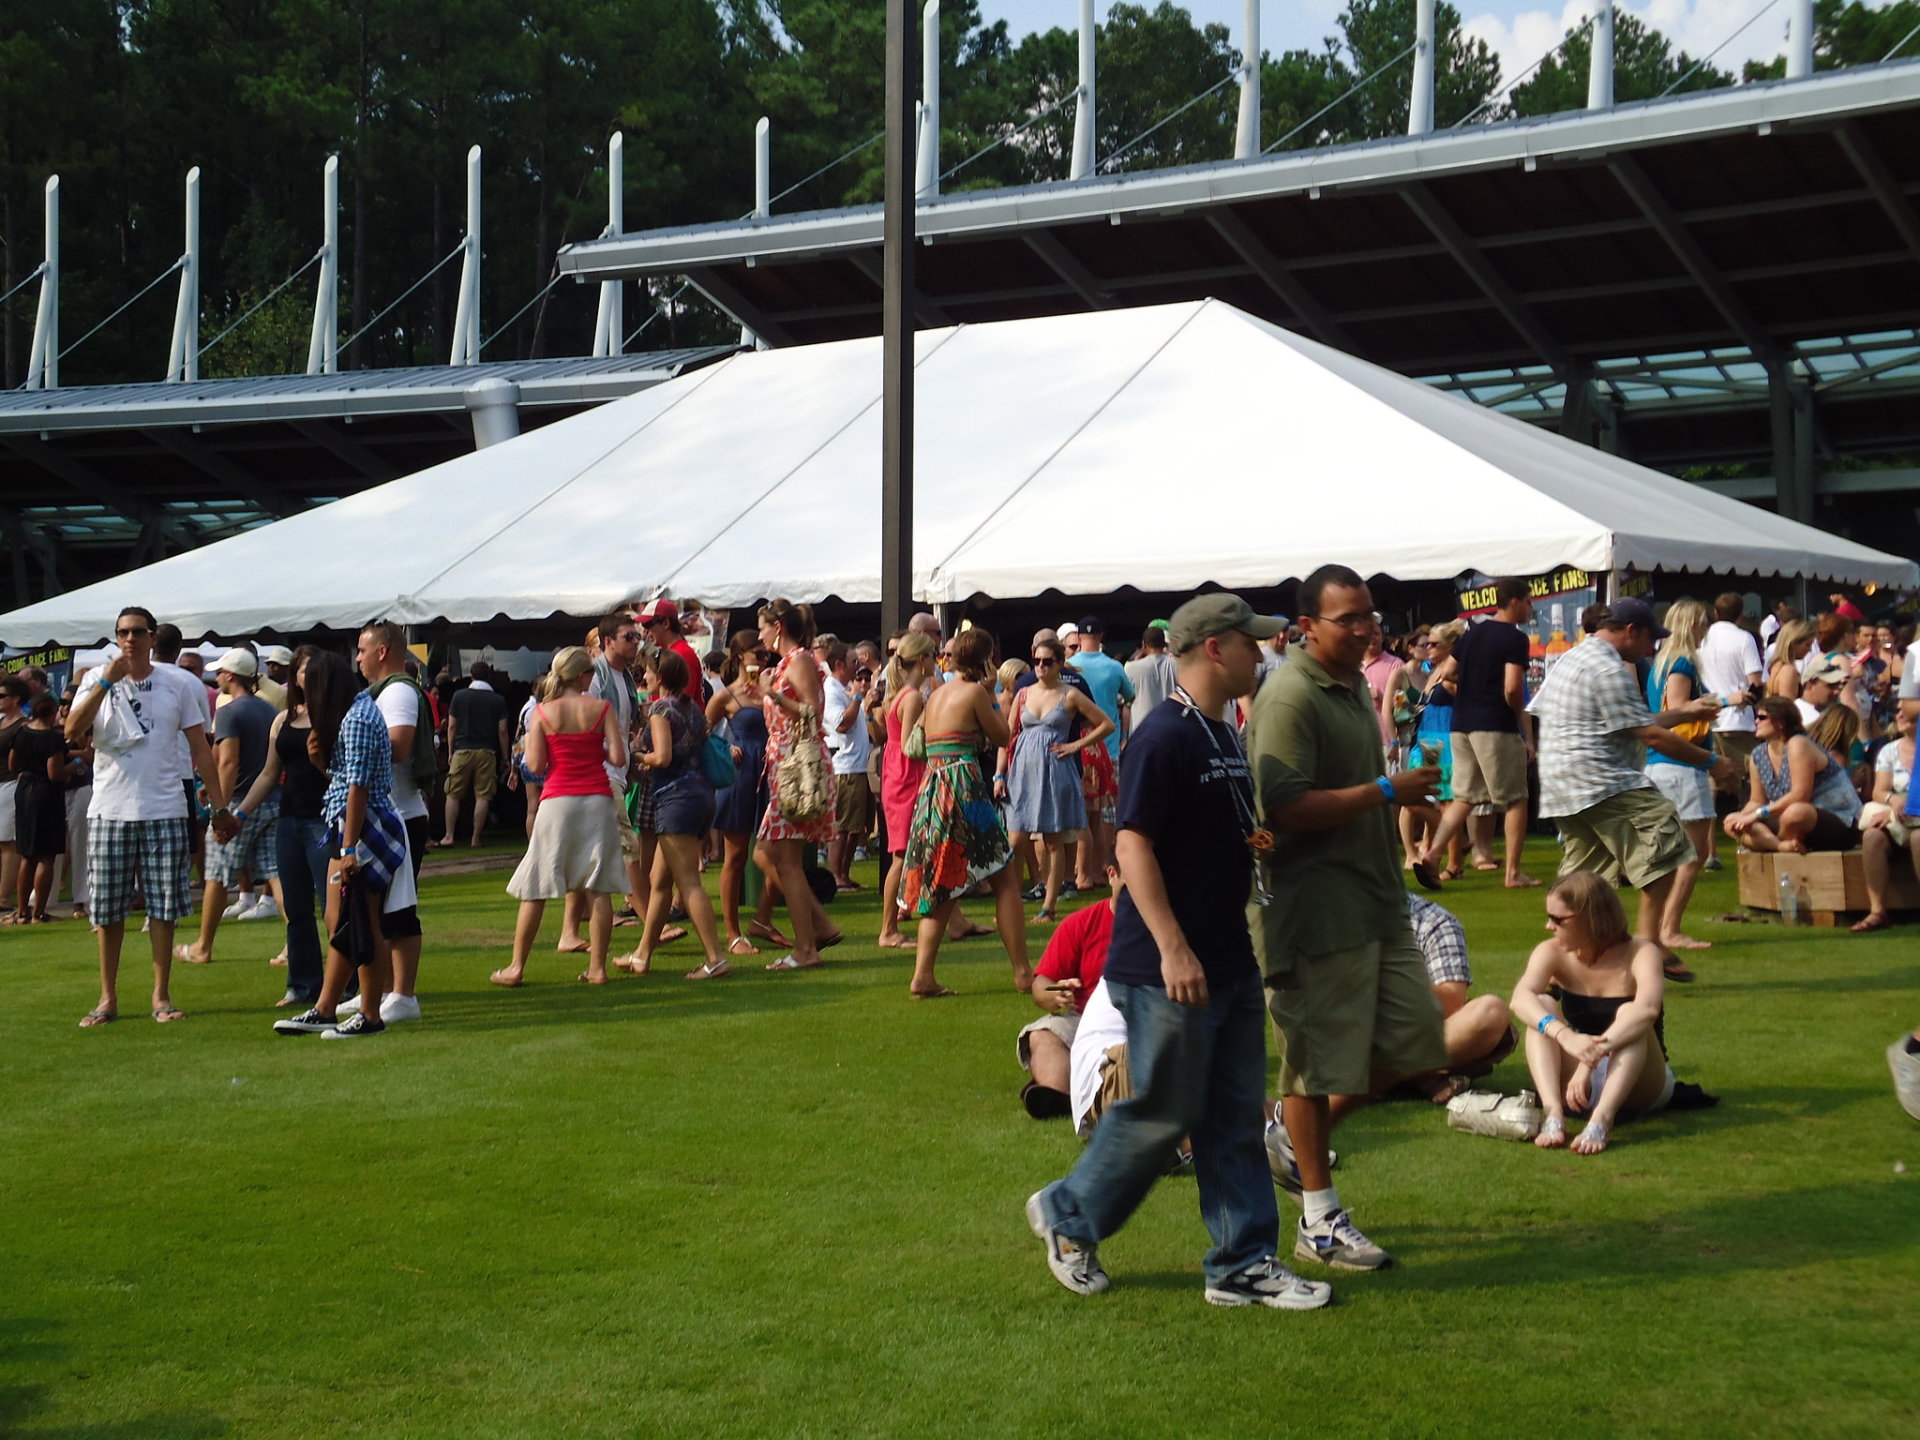 Beer, Bourbon & BBQ Festival in Cary